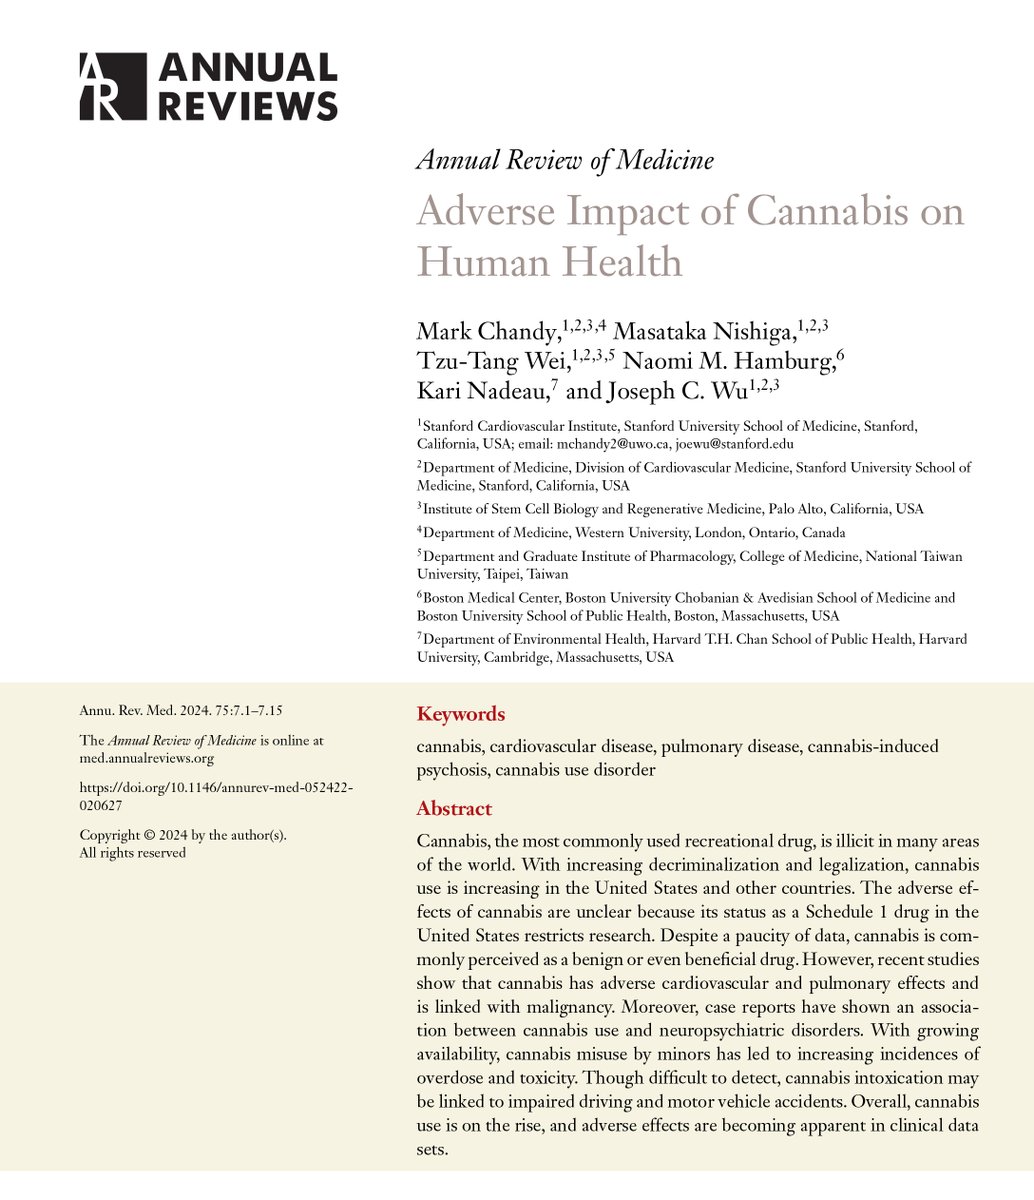 #Cannabis use is rising due to legalization. Our @AnnualReviews discusses its adverse #CVD effects pubmed.ncbi.nlm.nih.gov/37582489/ @mjkchandy @Thomaswei737 @MasaNishiga @NaomiHamburg @Stanford_ChEMH @StanfordCVI @StanfordMed @American_Heart @WesternU @HeartandStroke @vascularbiology